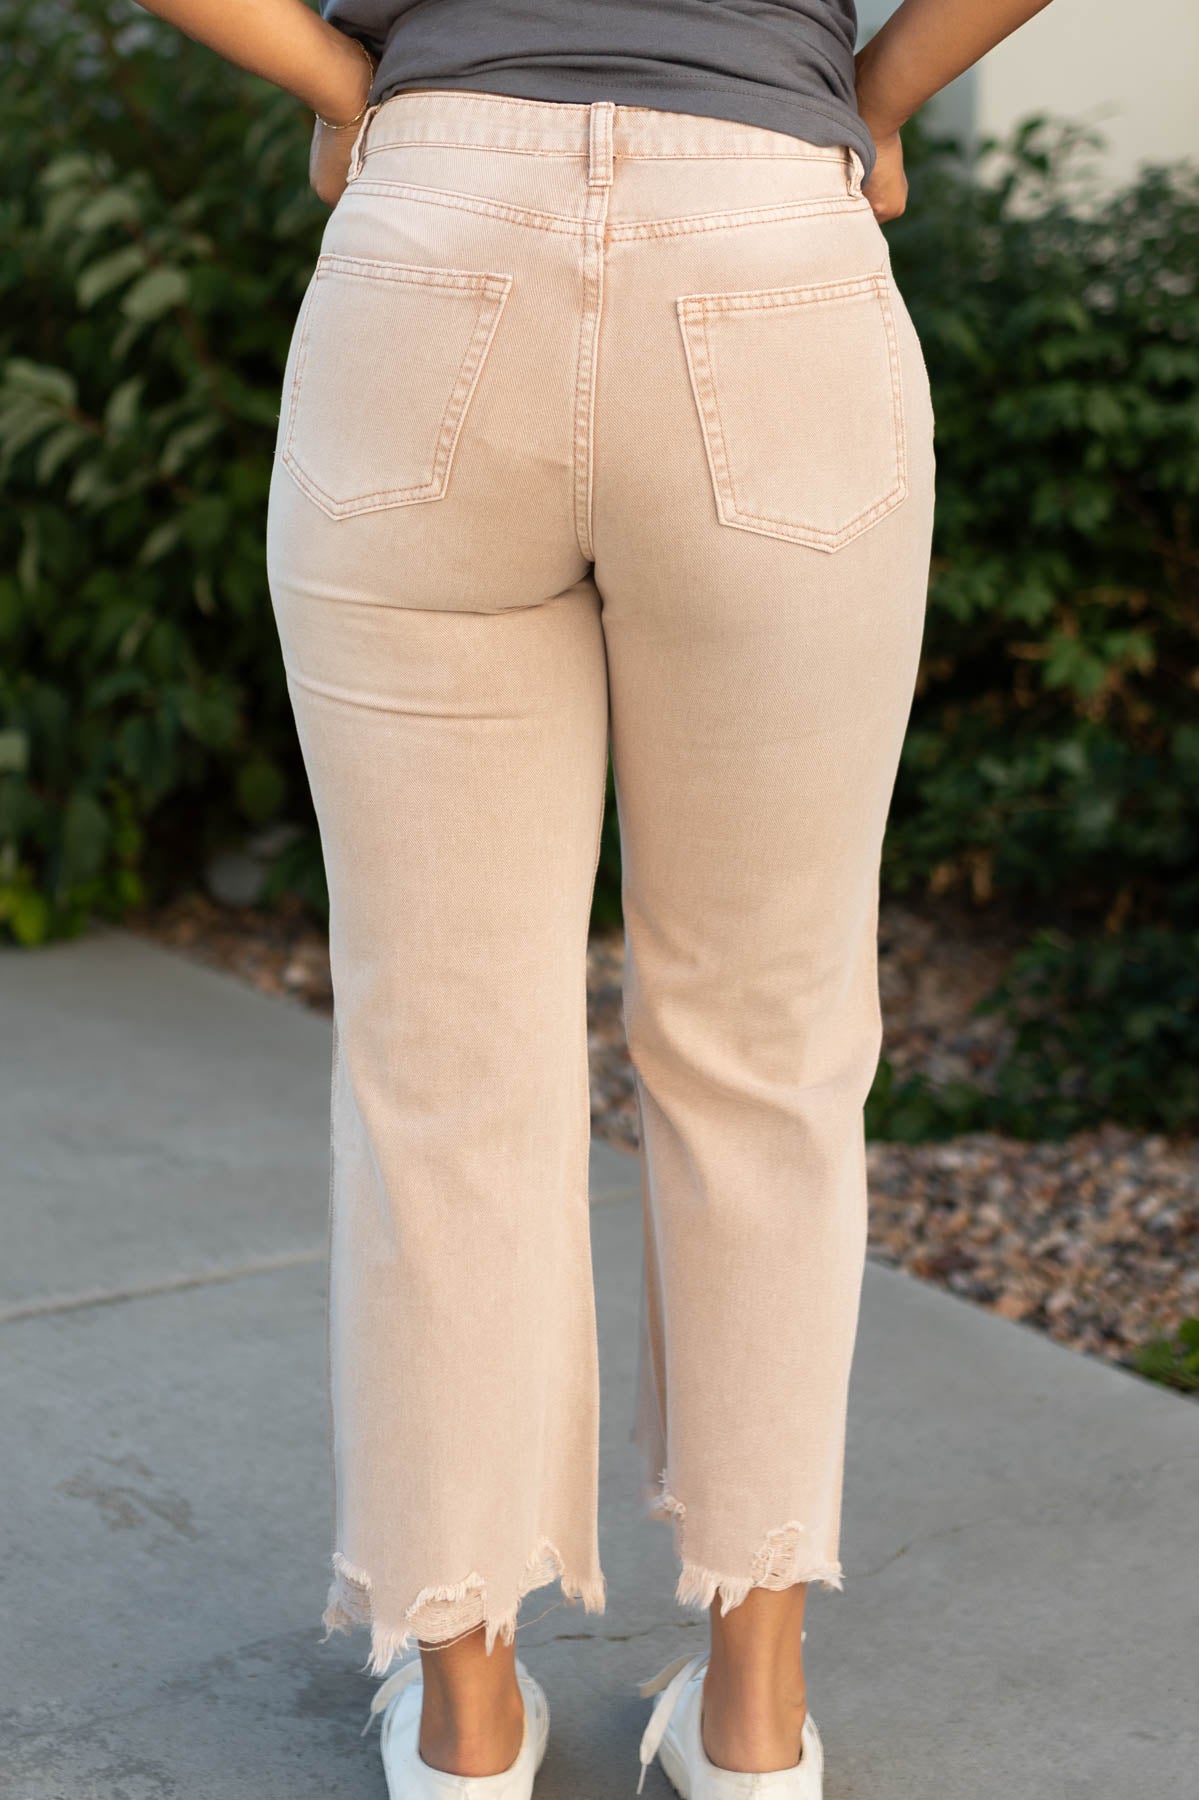 Back view of dusty mauve jeans